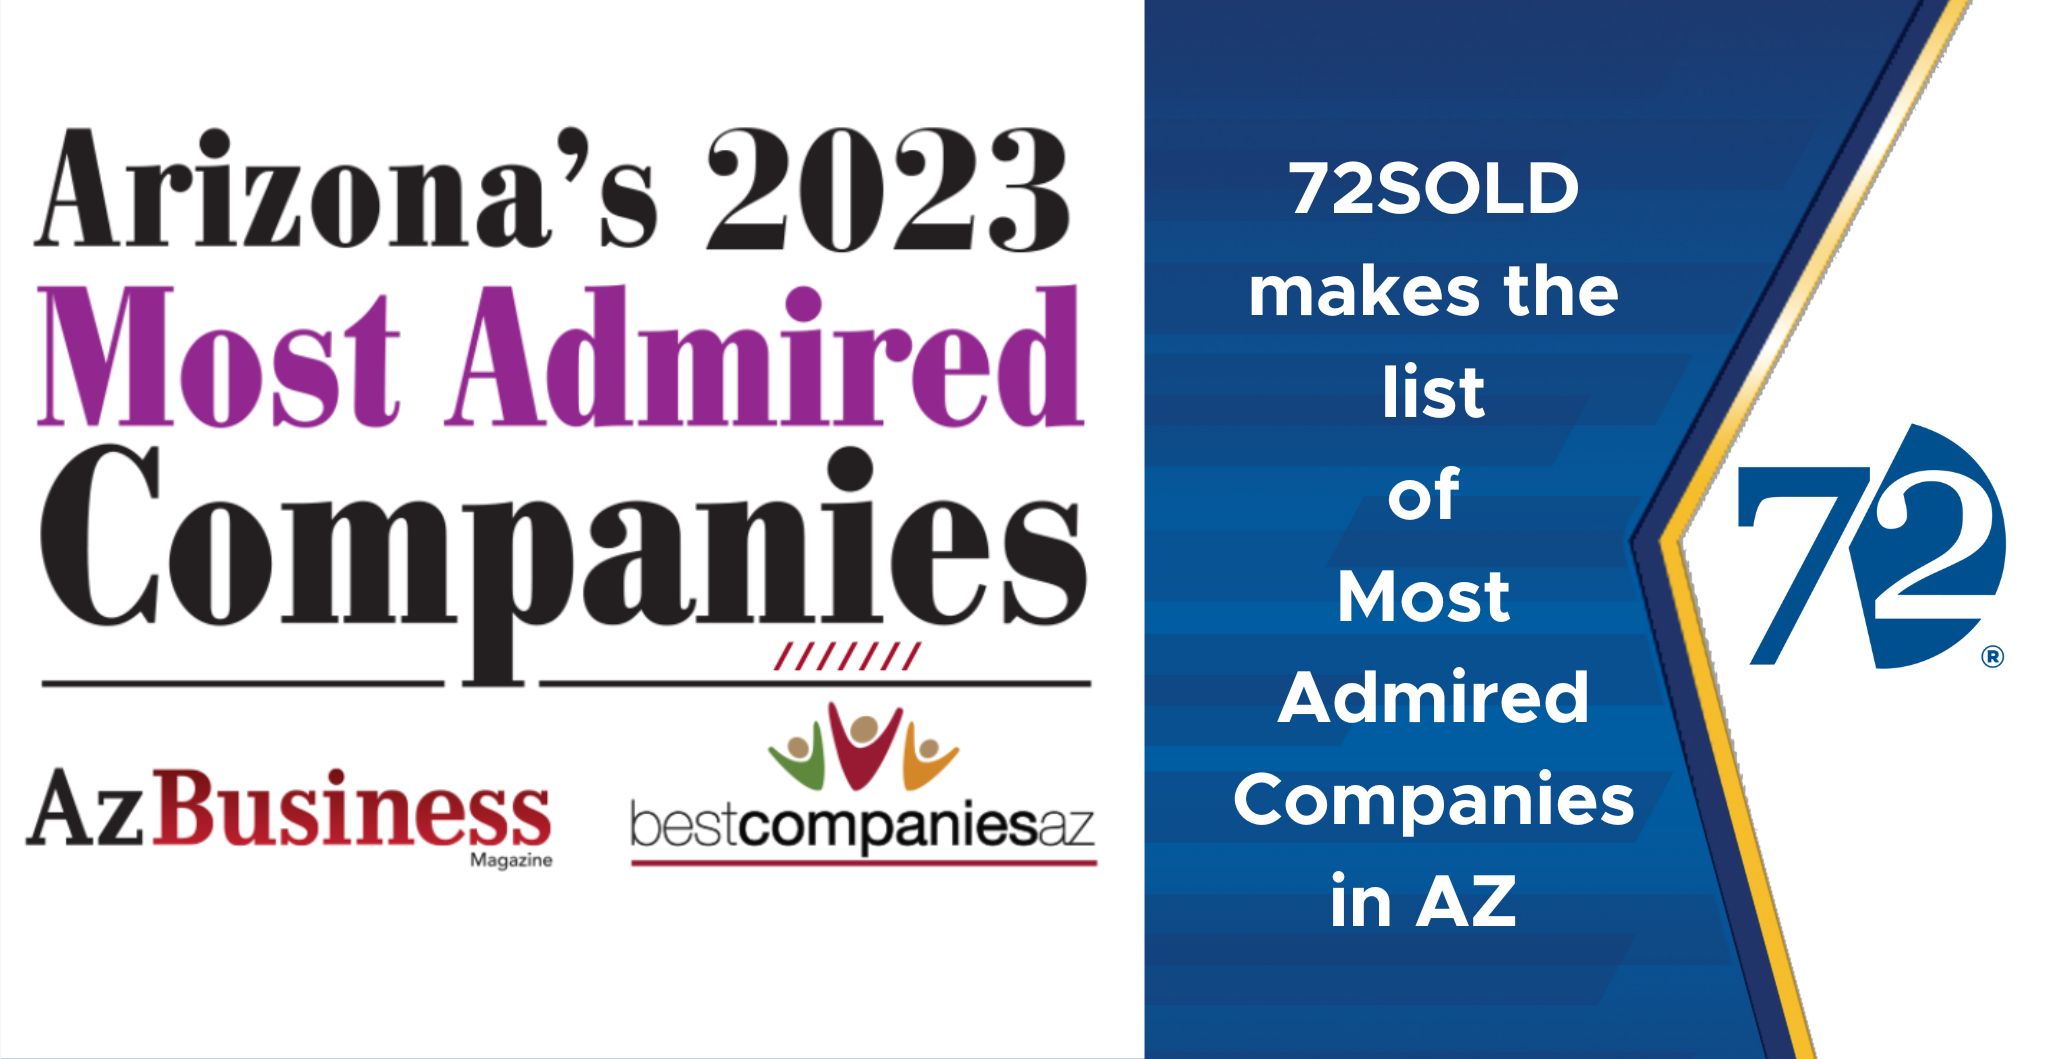 72SOLD has been selected as one of AZ Business Magazine's, Arizona's Most Admired Companies of 2023.